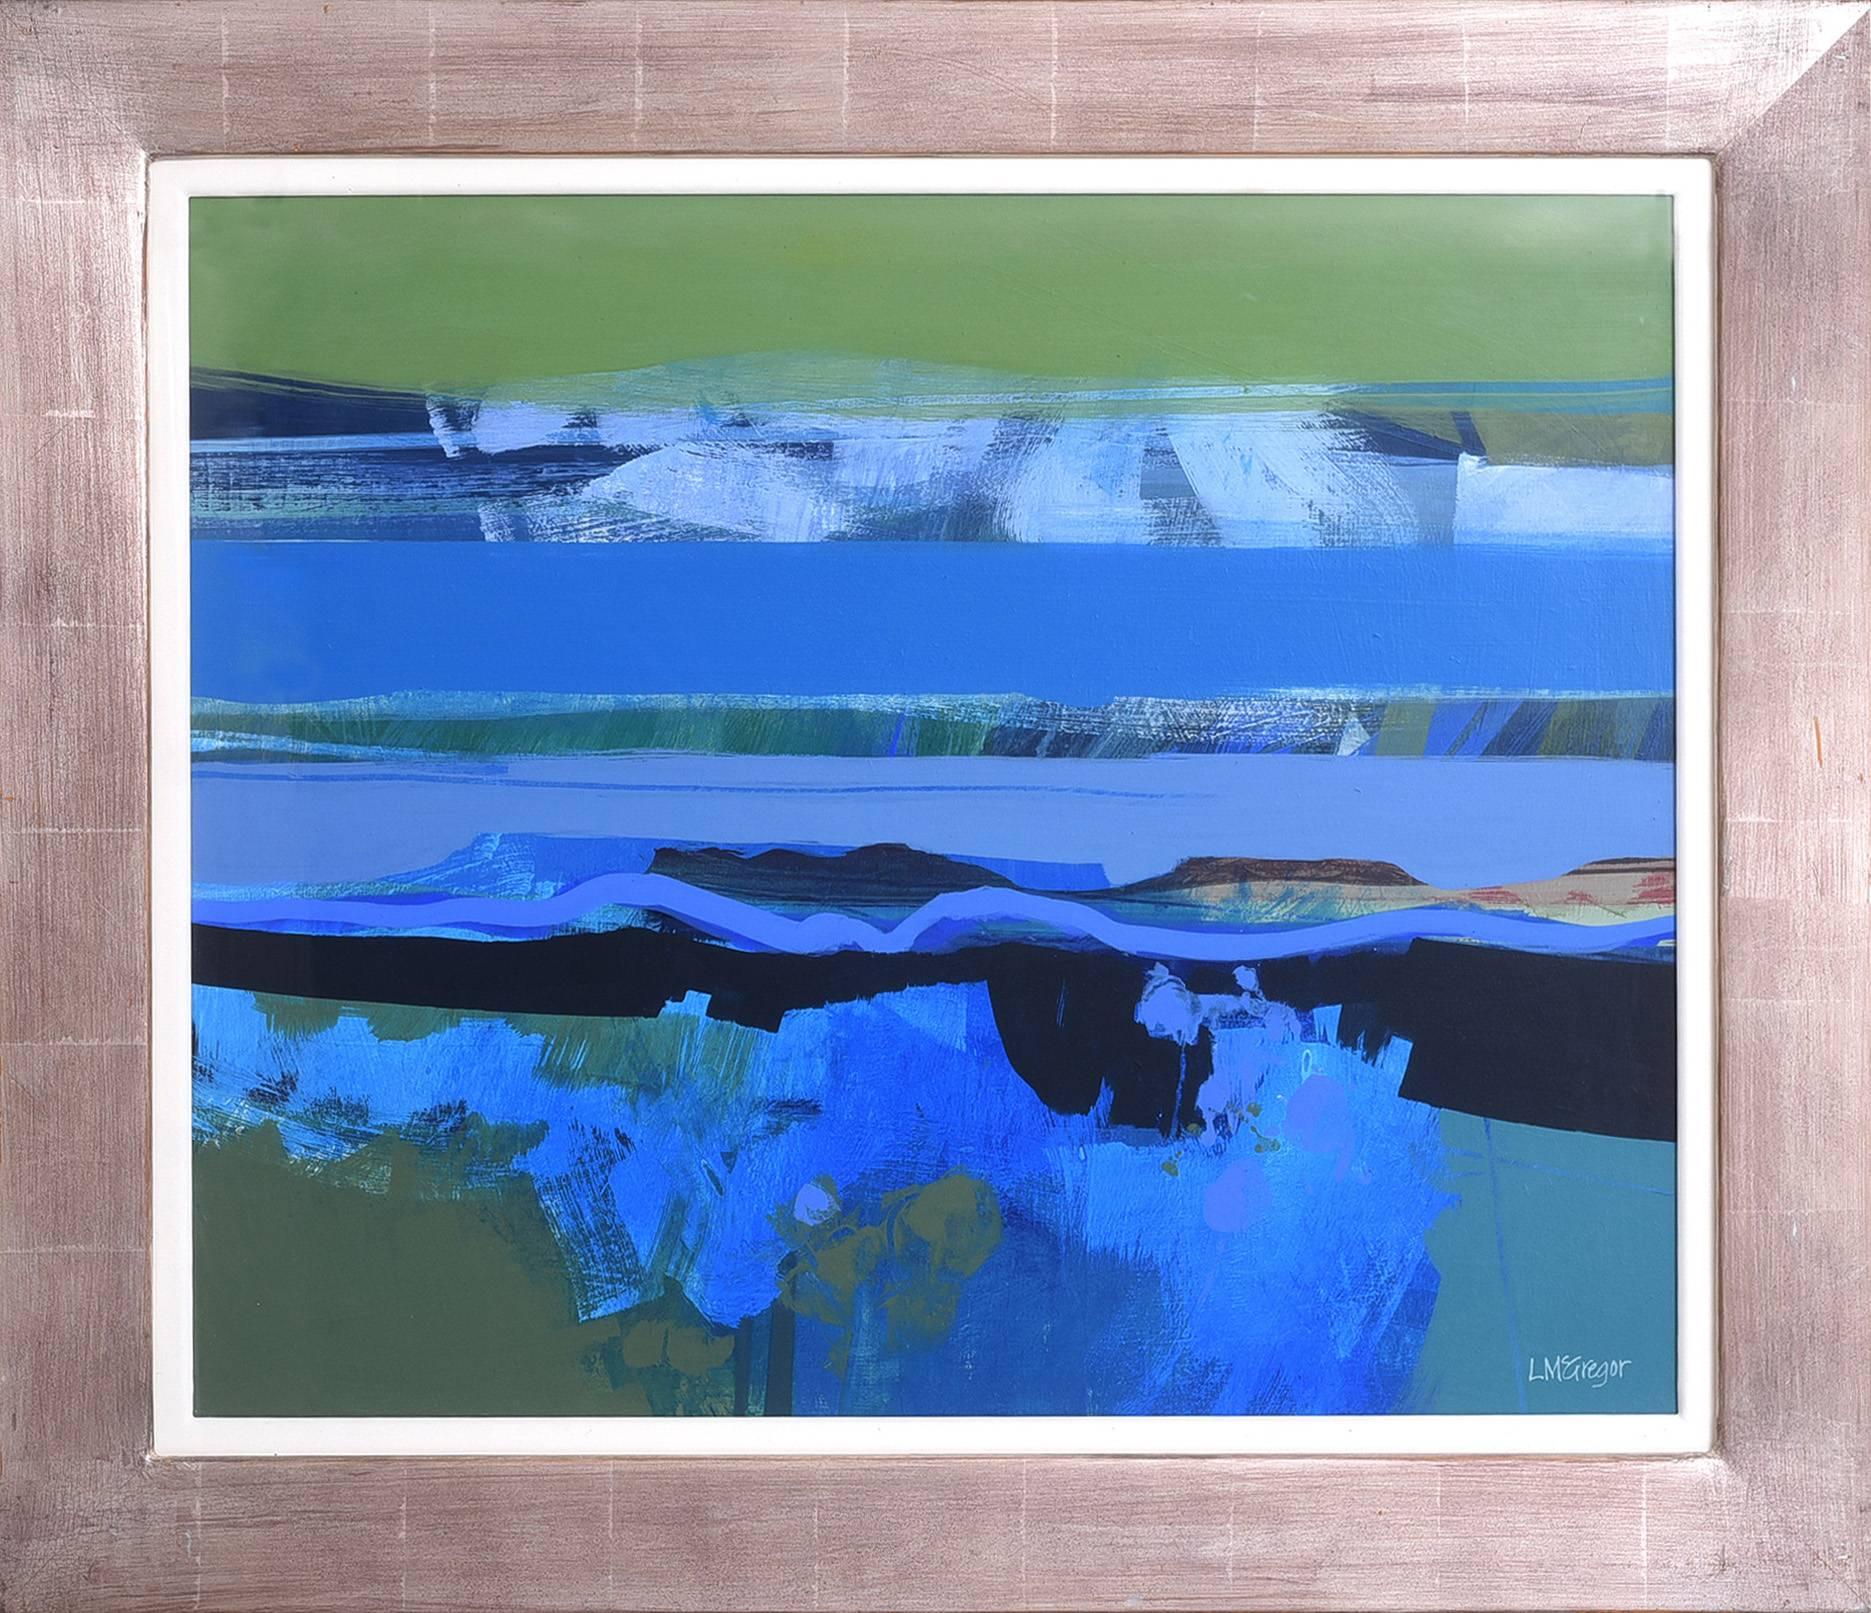 Oil on board
Singed 
Framed
Measure: 21 x 26 inches (28 x 33 inches framed)

Artist Bio:
I was born in Pittenweem in the East Neuk of Fife, and trained at Edinburgh College of Art. I was elected RSW in 2001.



Having lived and worked on